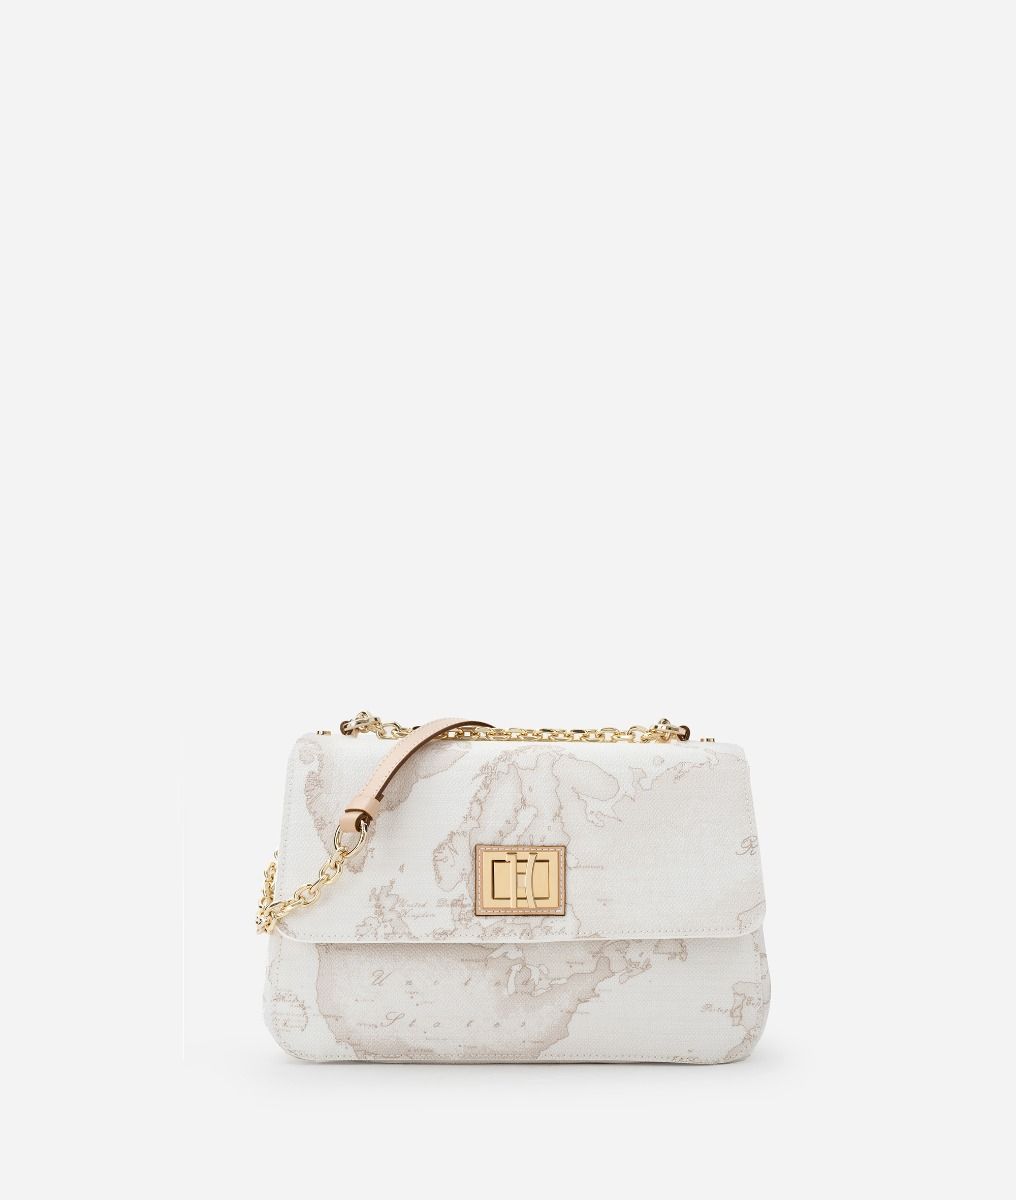 Geo White crossbody bag with front flap,front